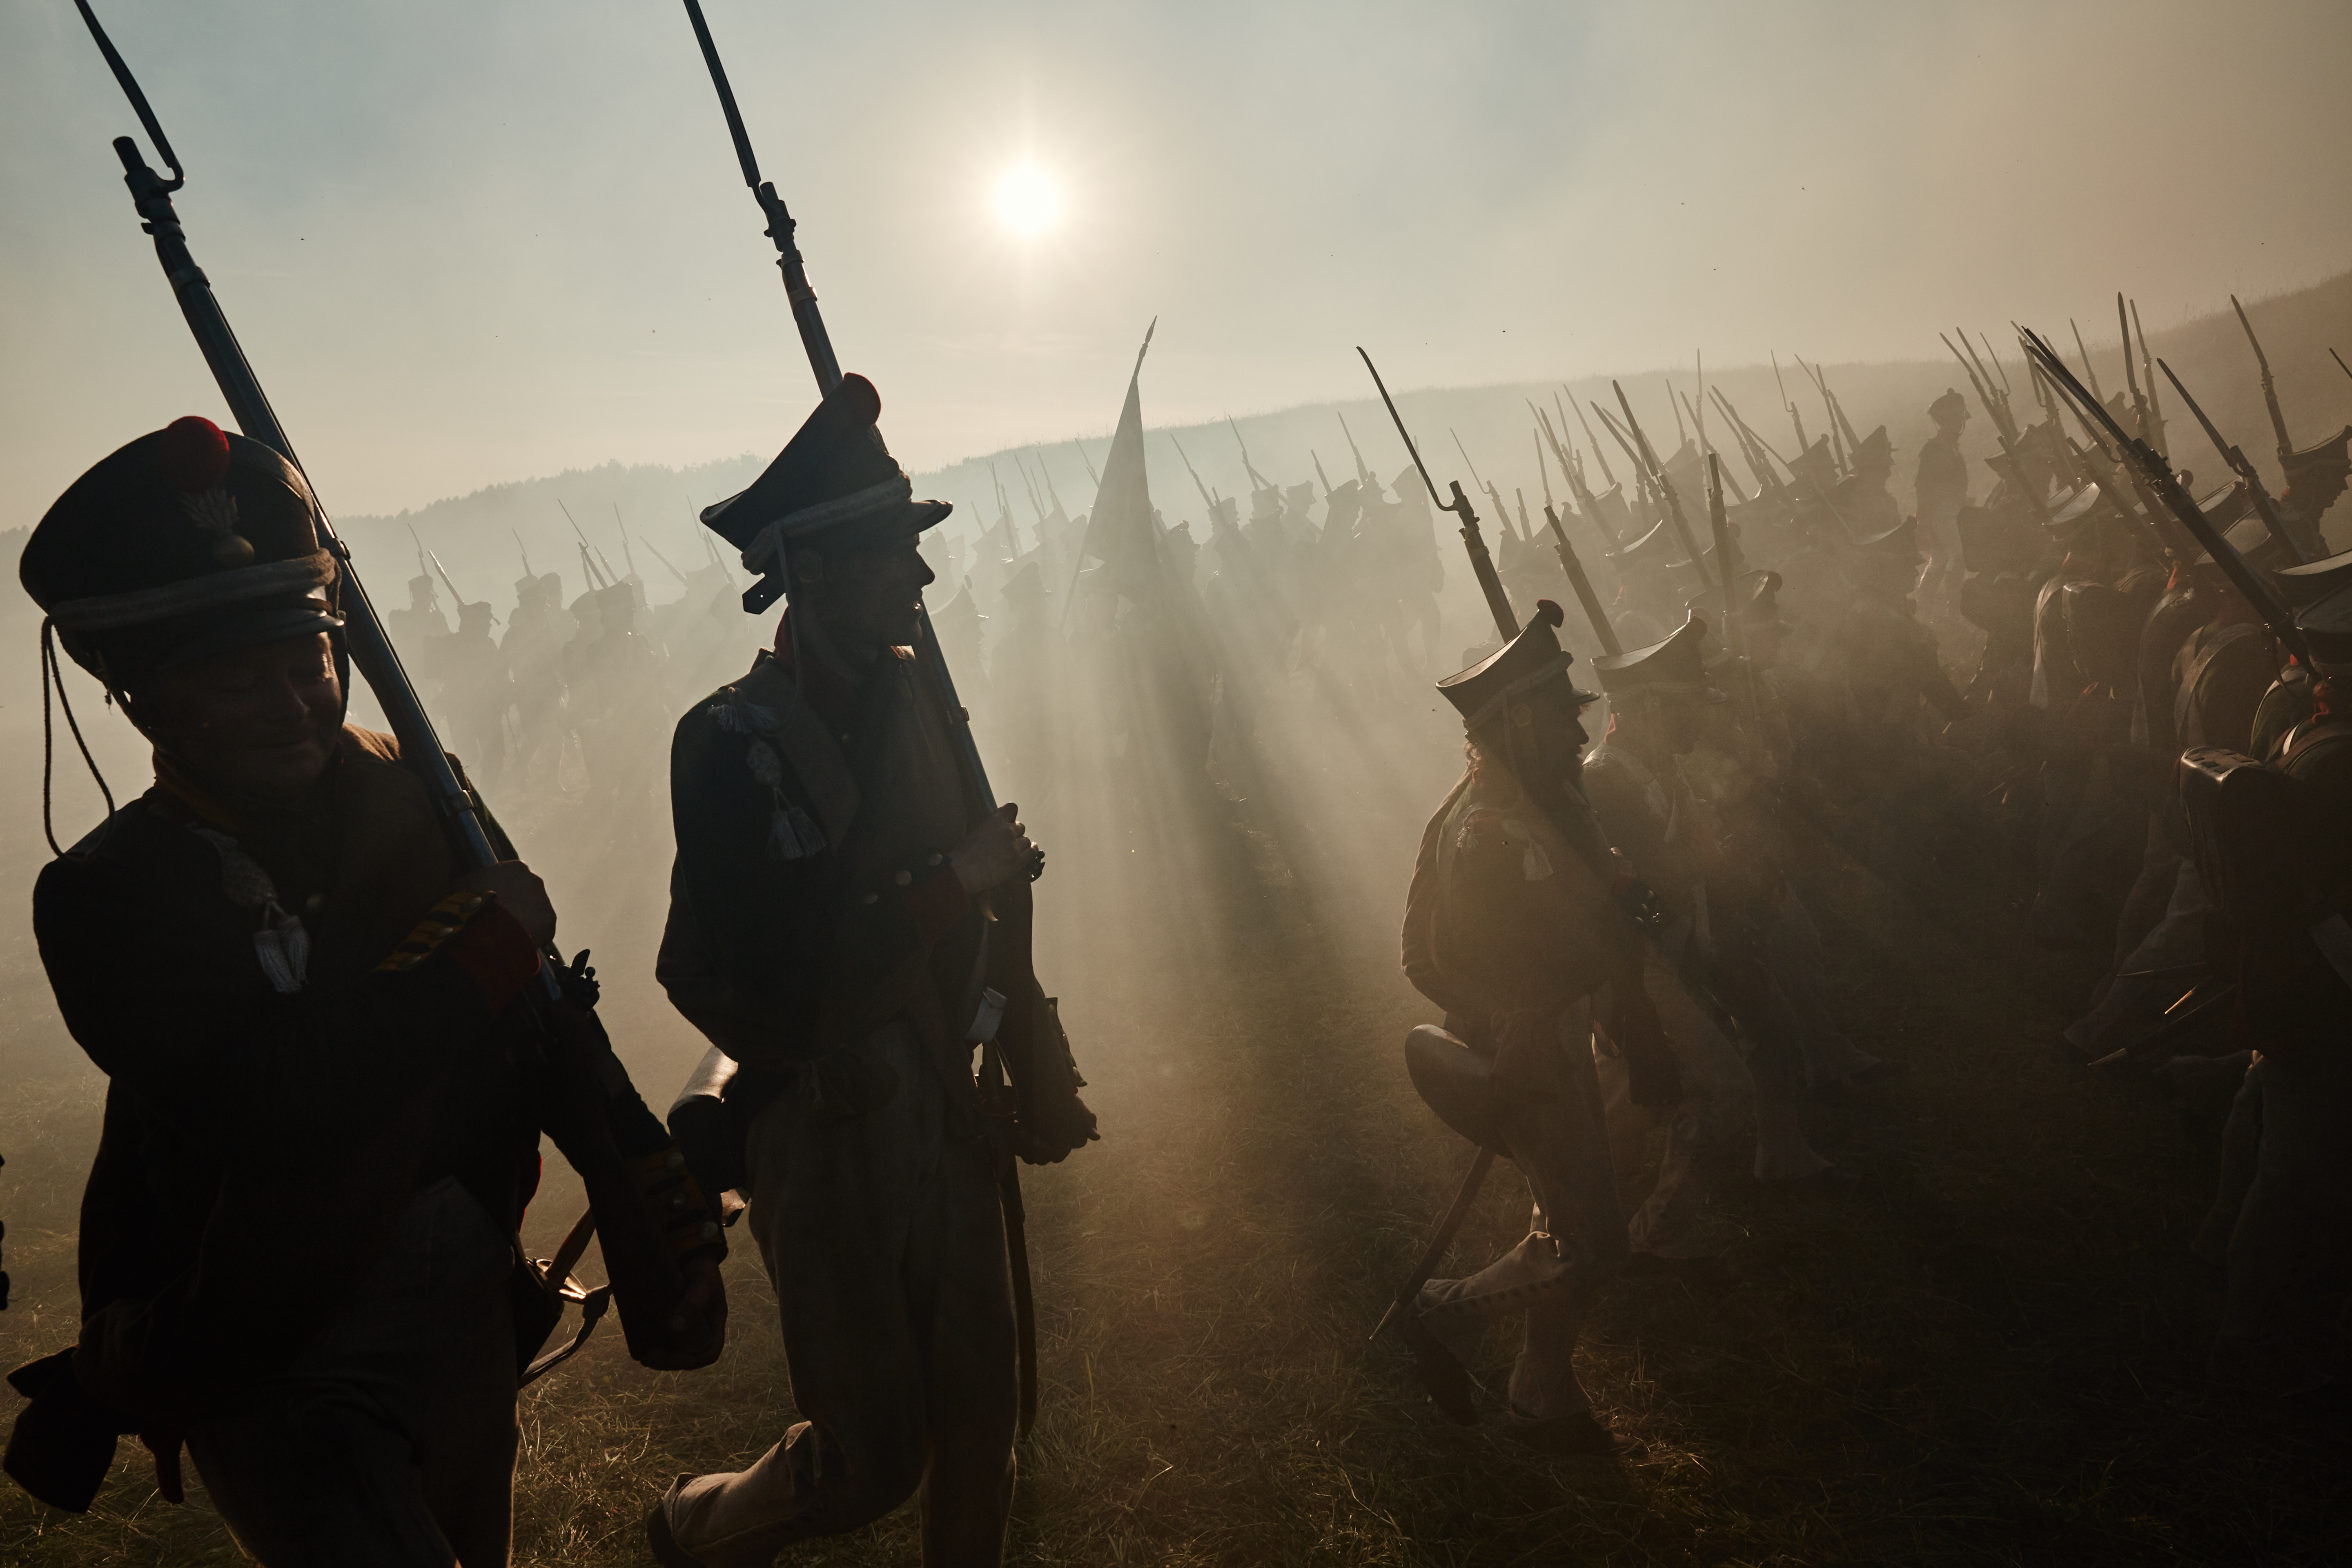 Soldiers march in the sunrise